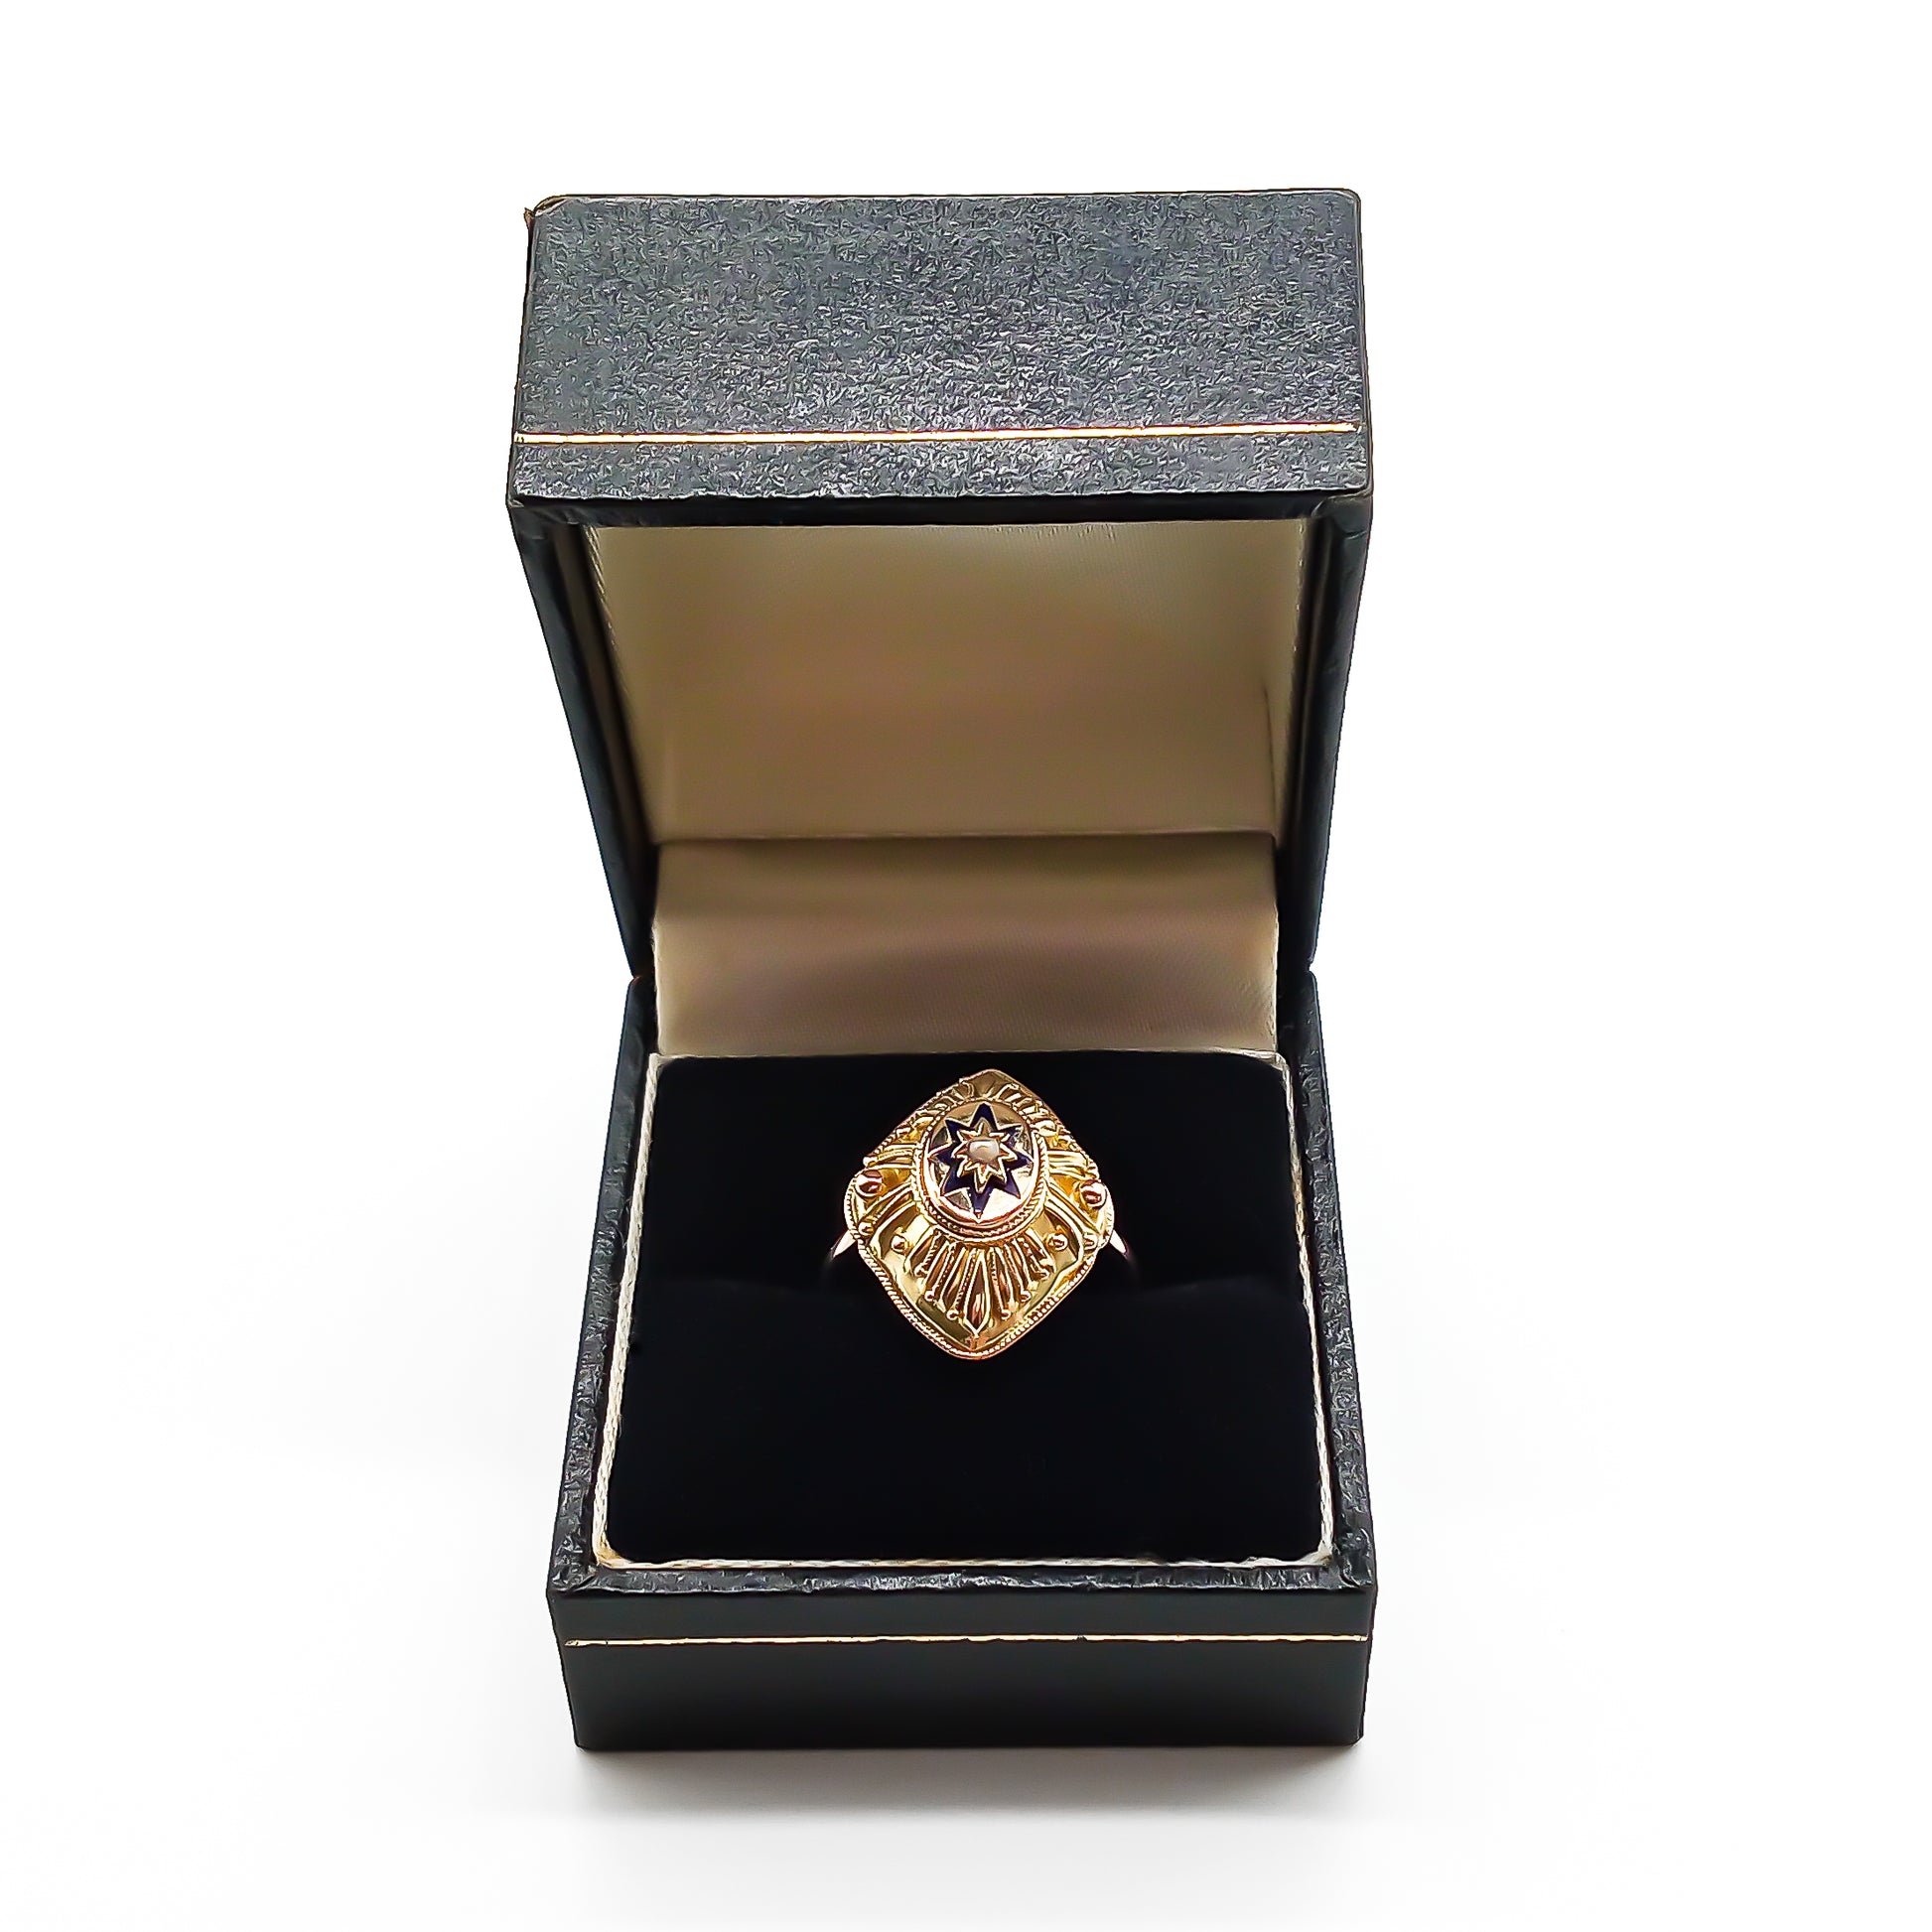 Lovely 15ct yellow gold Victorian ring with ornate detail. The ring is set with a single seed pearl, surrounded by dark blue enamelling in the shape of a star. Later shank.